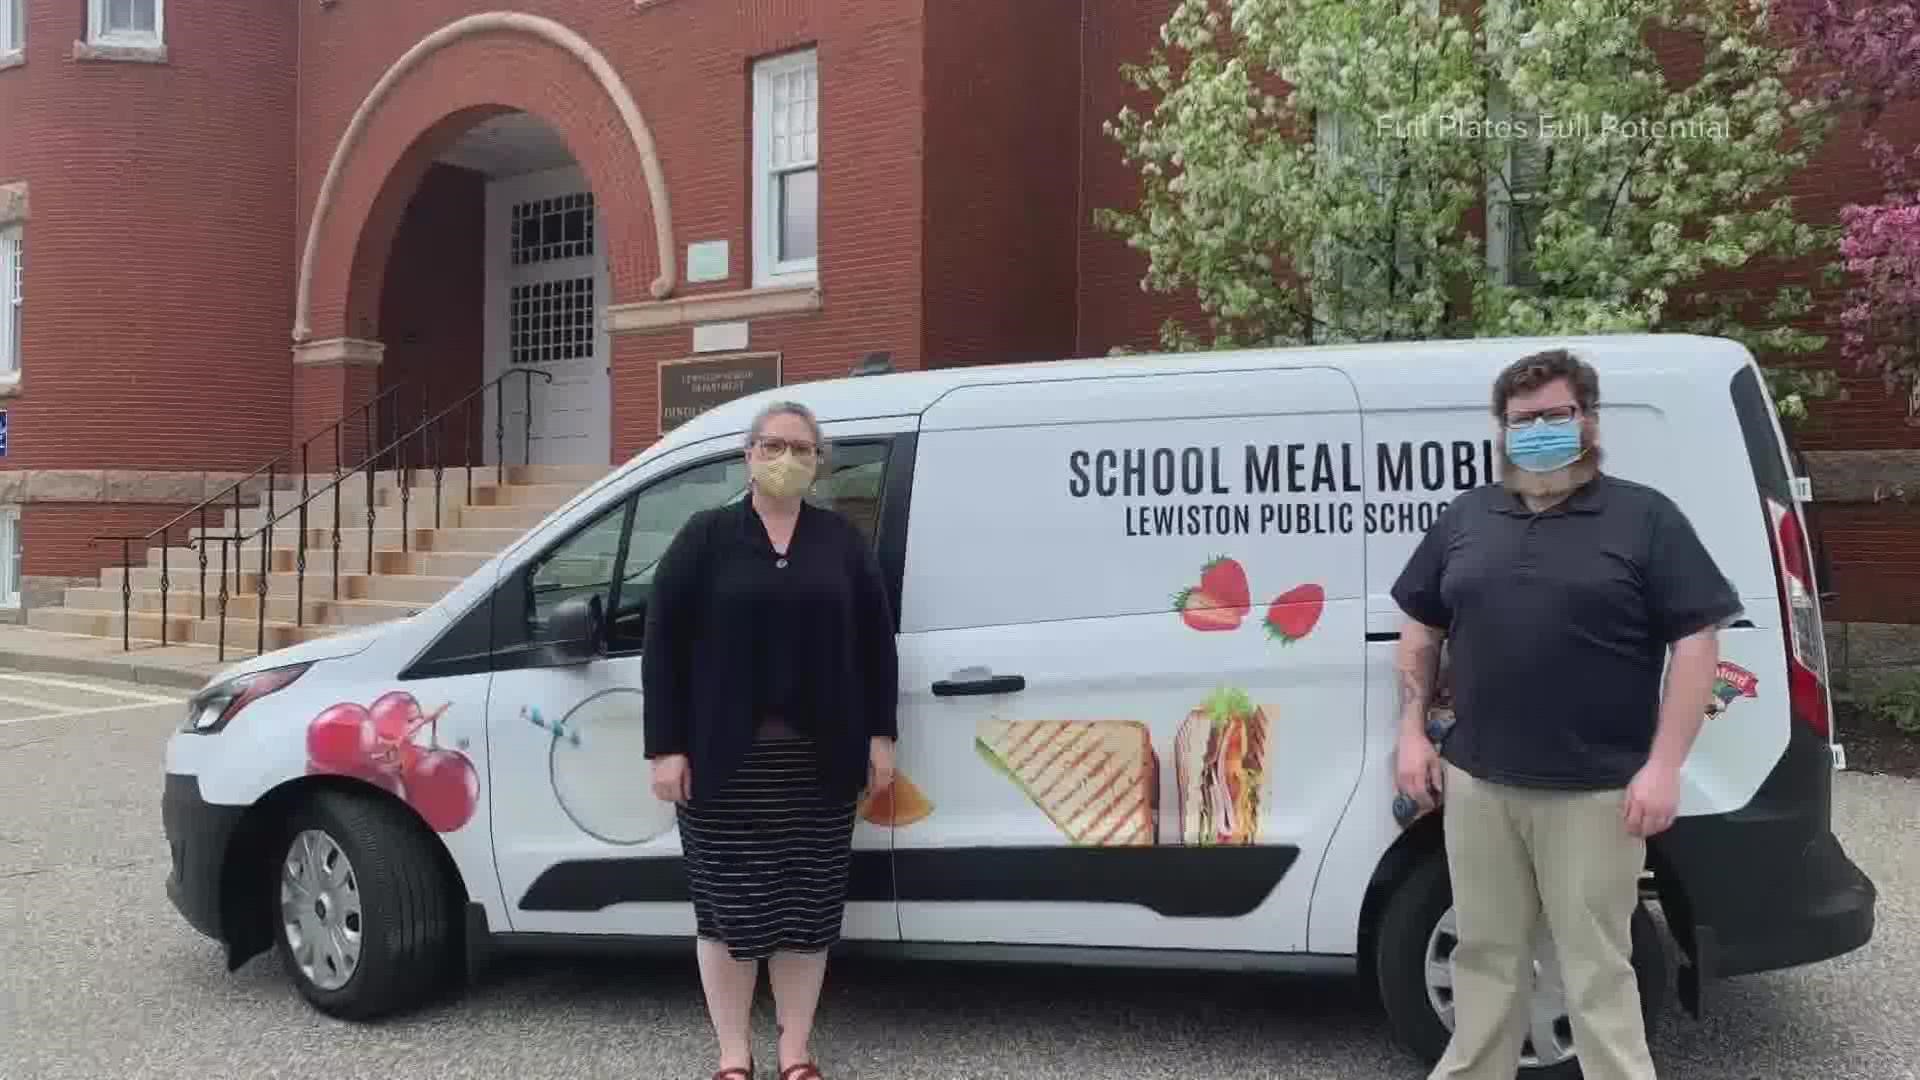 Lewiston Public Schools received a new van for free in 2021, thanks to Full Plates Full Potential and Hannaford. The team has served almost 50,000 summer meals.